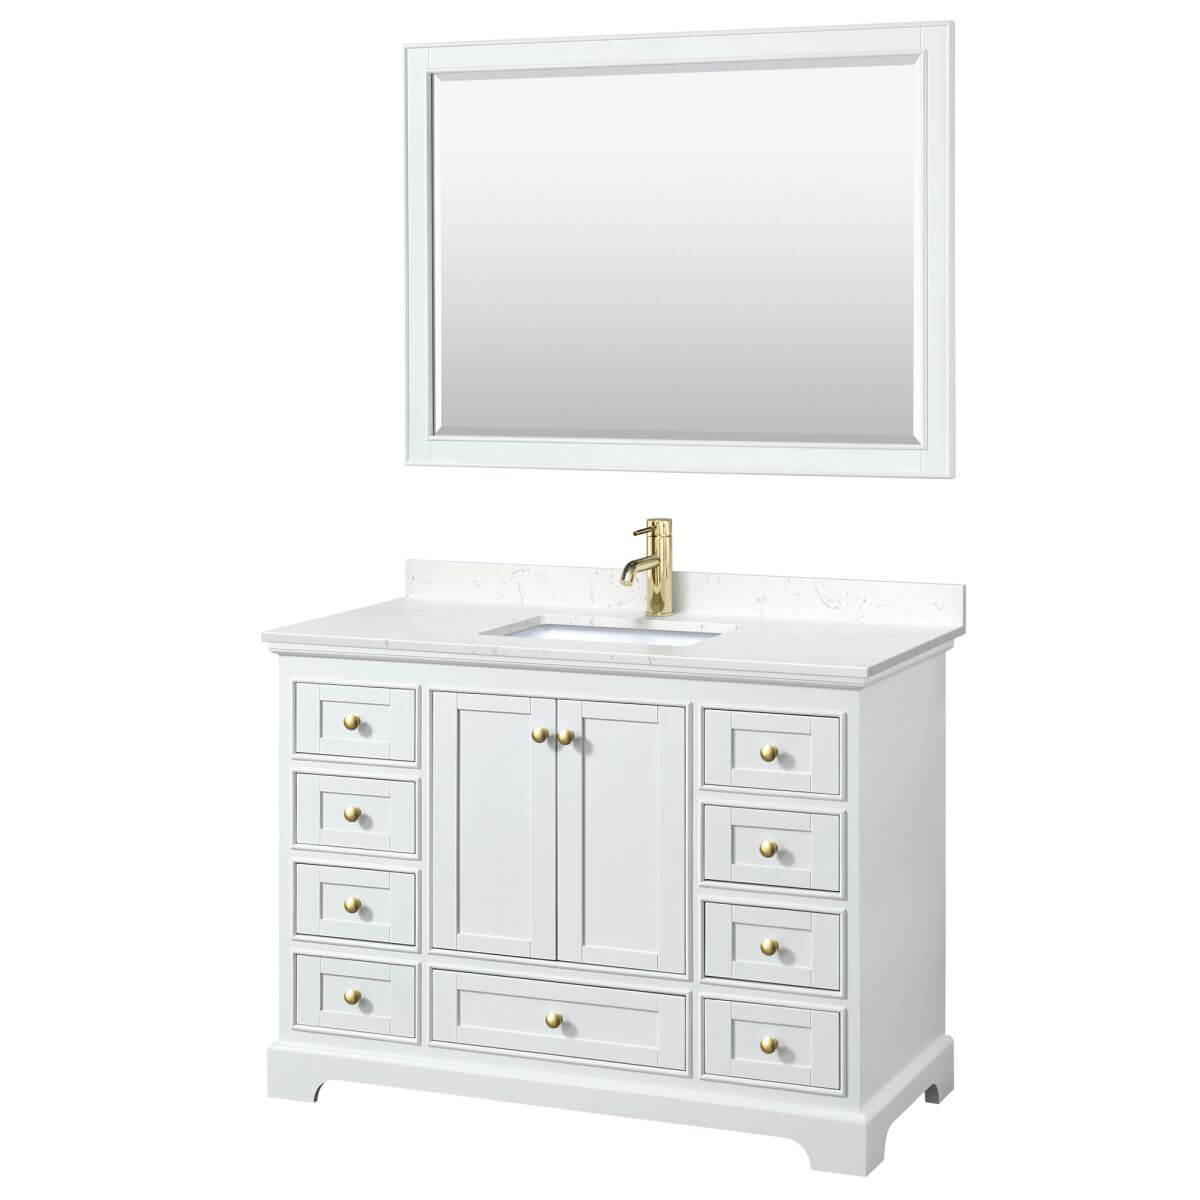 Wyndham Collection Deborah 48 inch Single Bathroom Vanity in White with Carrara Cultured Marble Countertop, Undermount Square Sink, Brushed Gold Trim and 46 inch Mirror - WCS202048SWGC2UNSM46